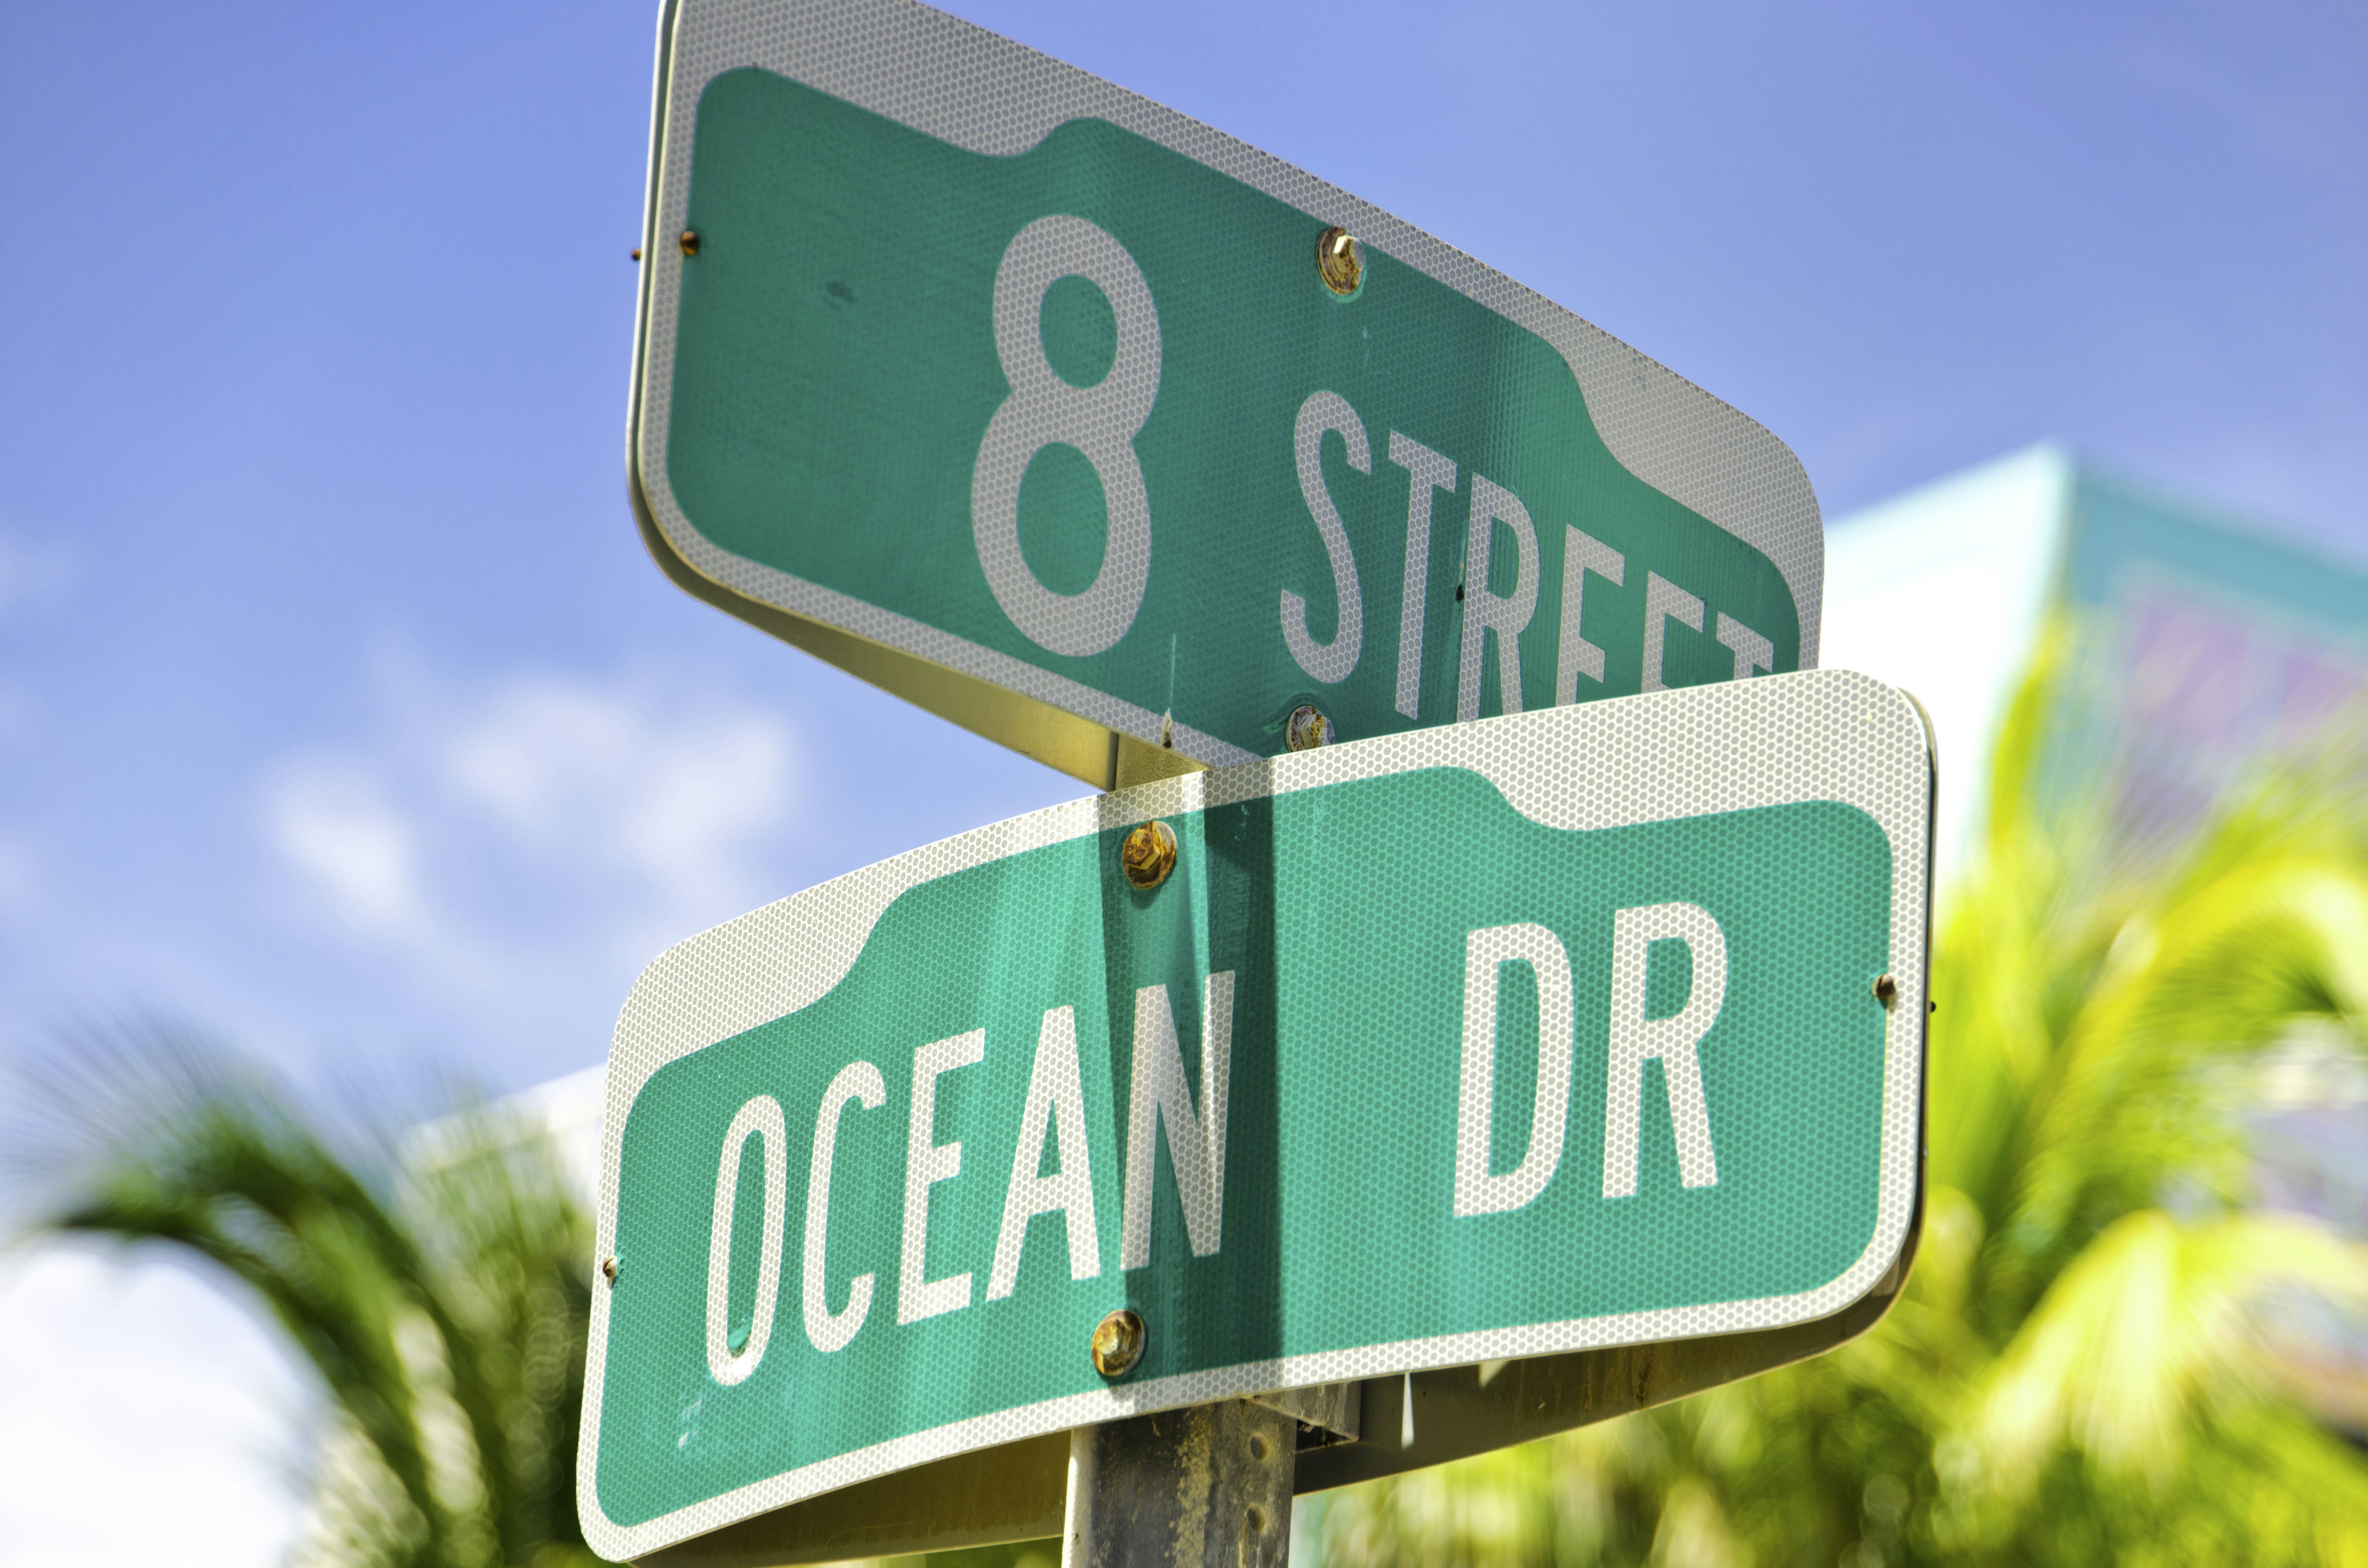 Close up of a green street sign in Miami. The streets on the sign are 8th Street and Ocean Drive.